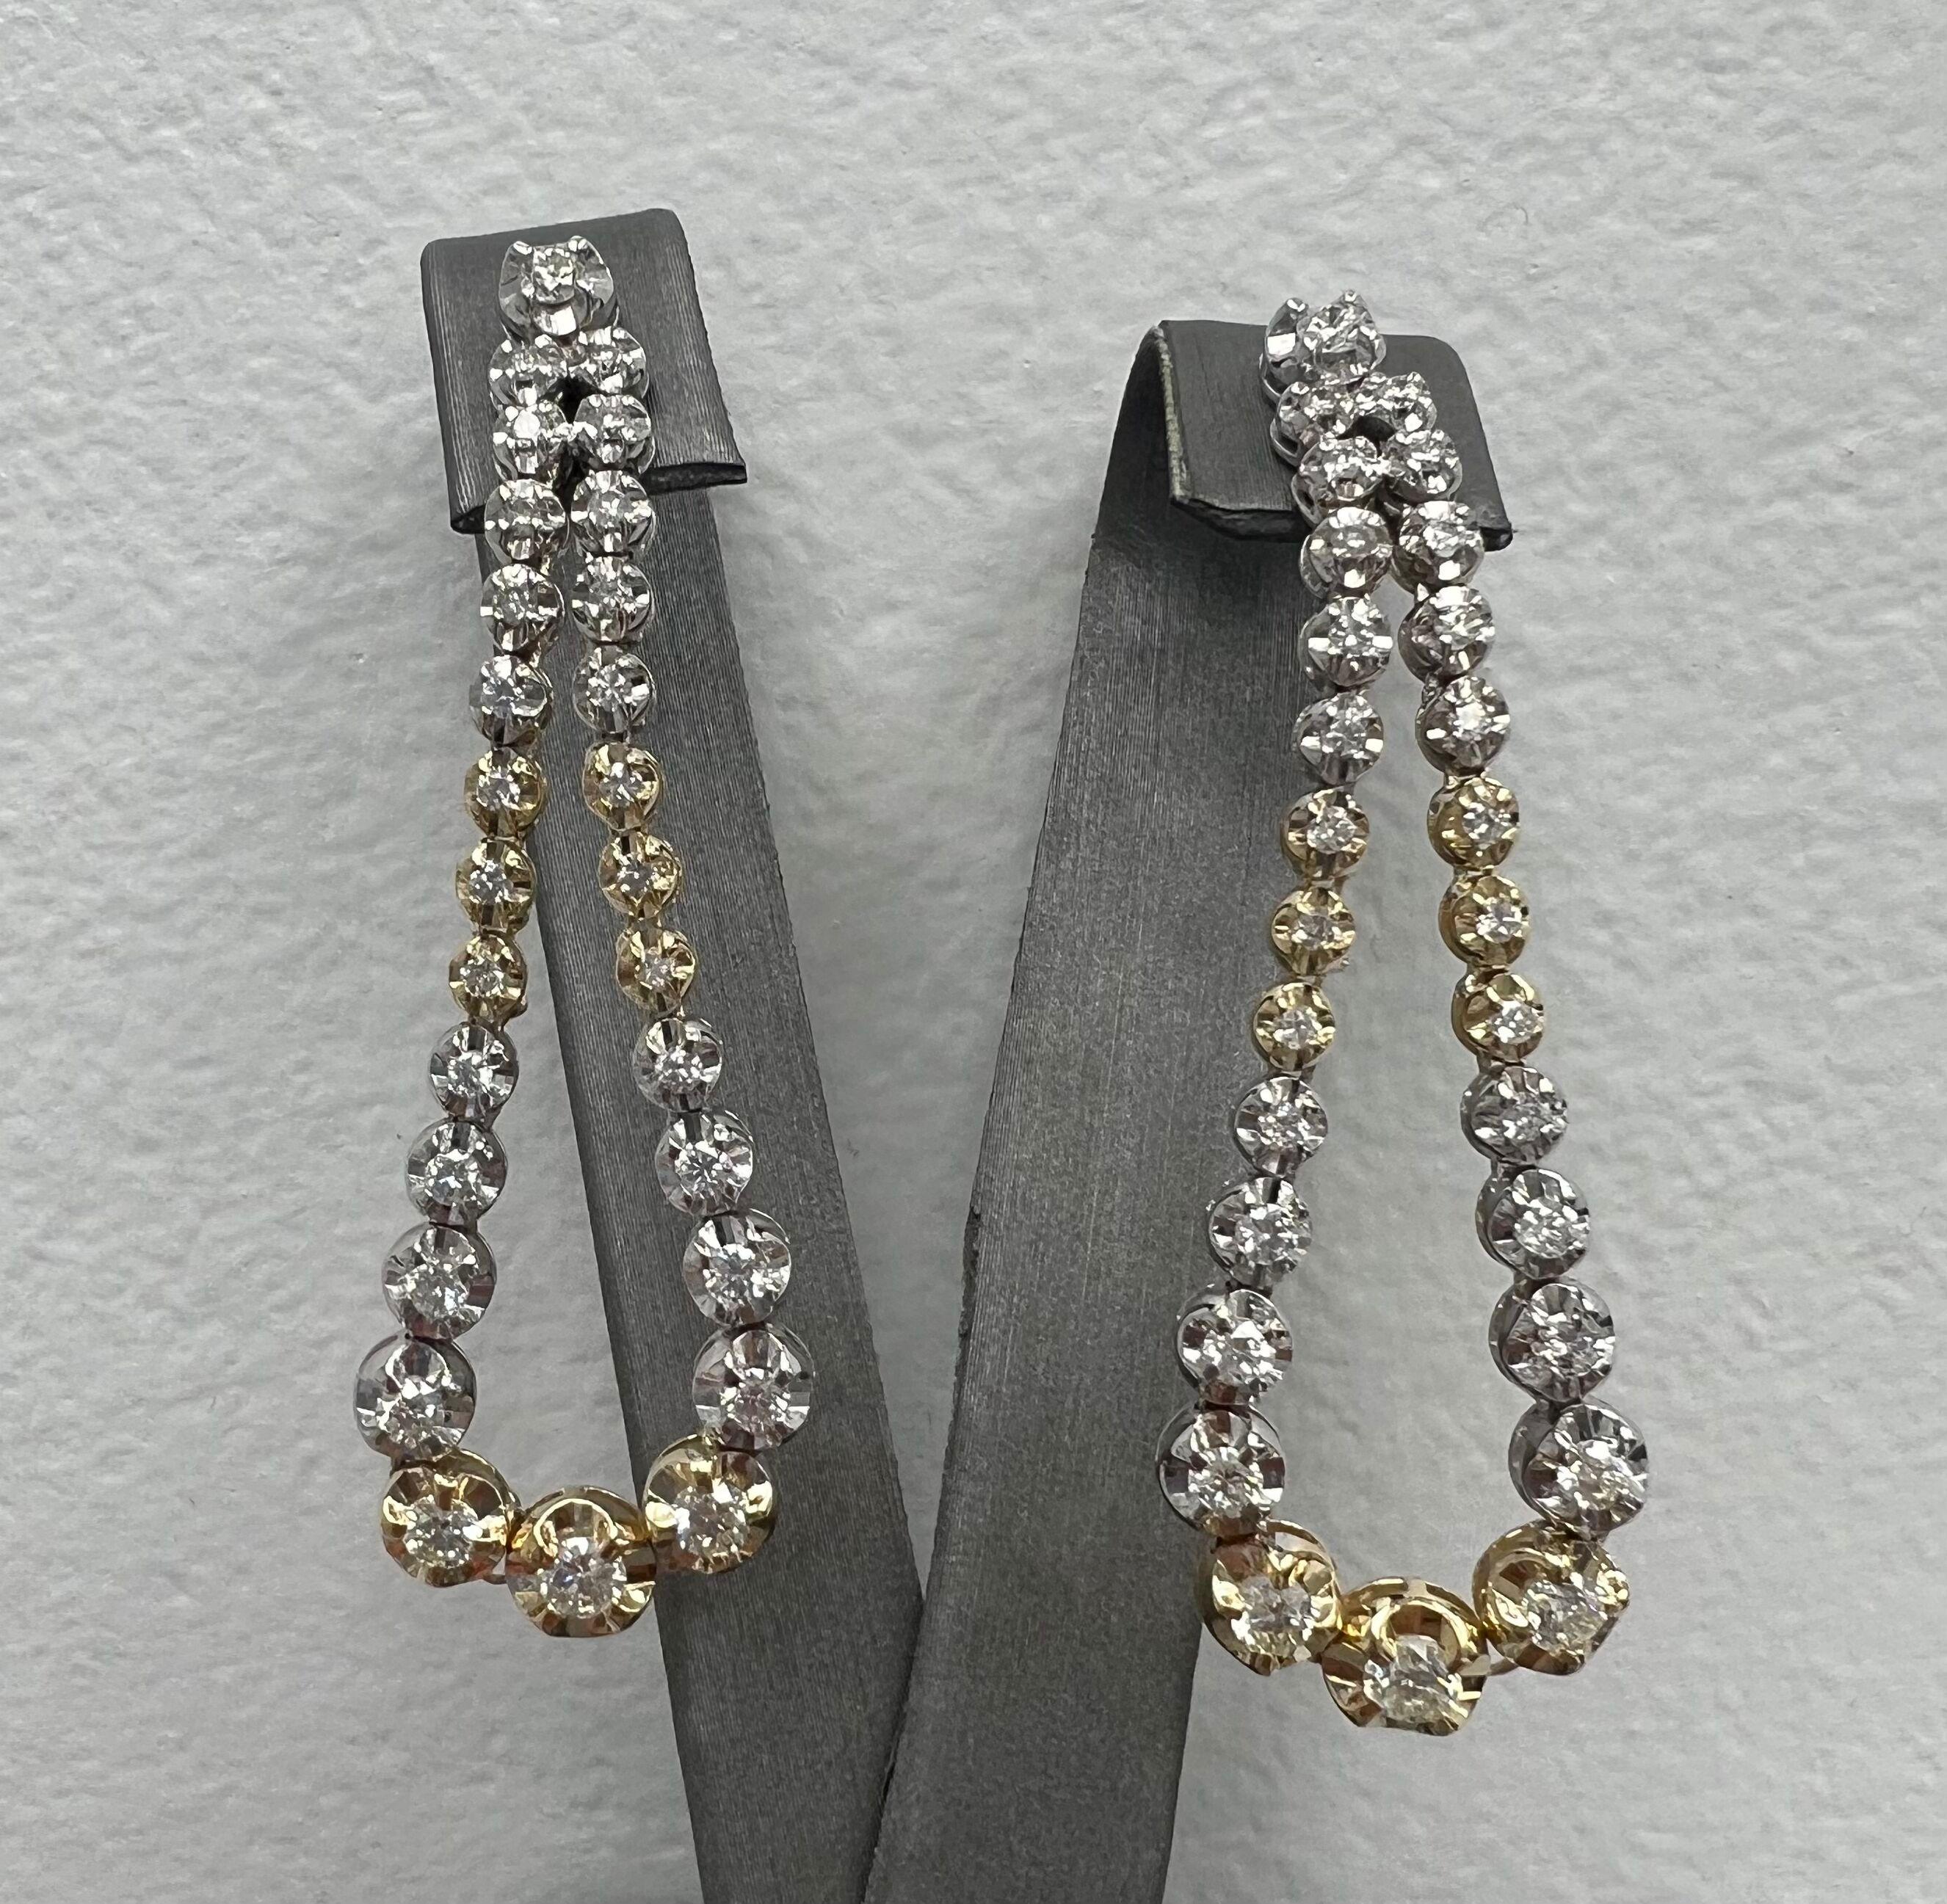 Unique Two Tone 18k Drop Earrings with Natural Full Cut Diamonds.
Amazing new style diamond Earrings perfect for any important occasion.
The Illusion setting makes the diamonds look 10x bigger.
18k White and Yellow Gold
Number of Diamonds: 56
Total